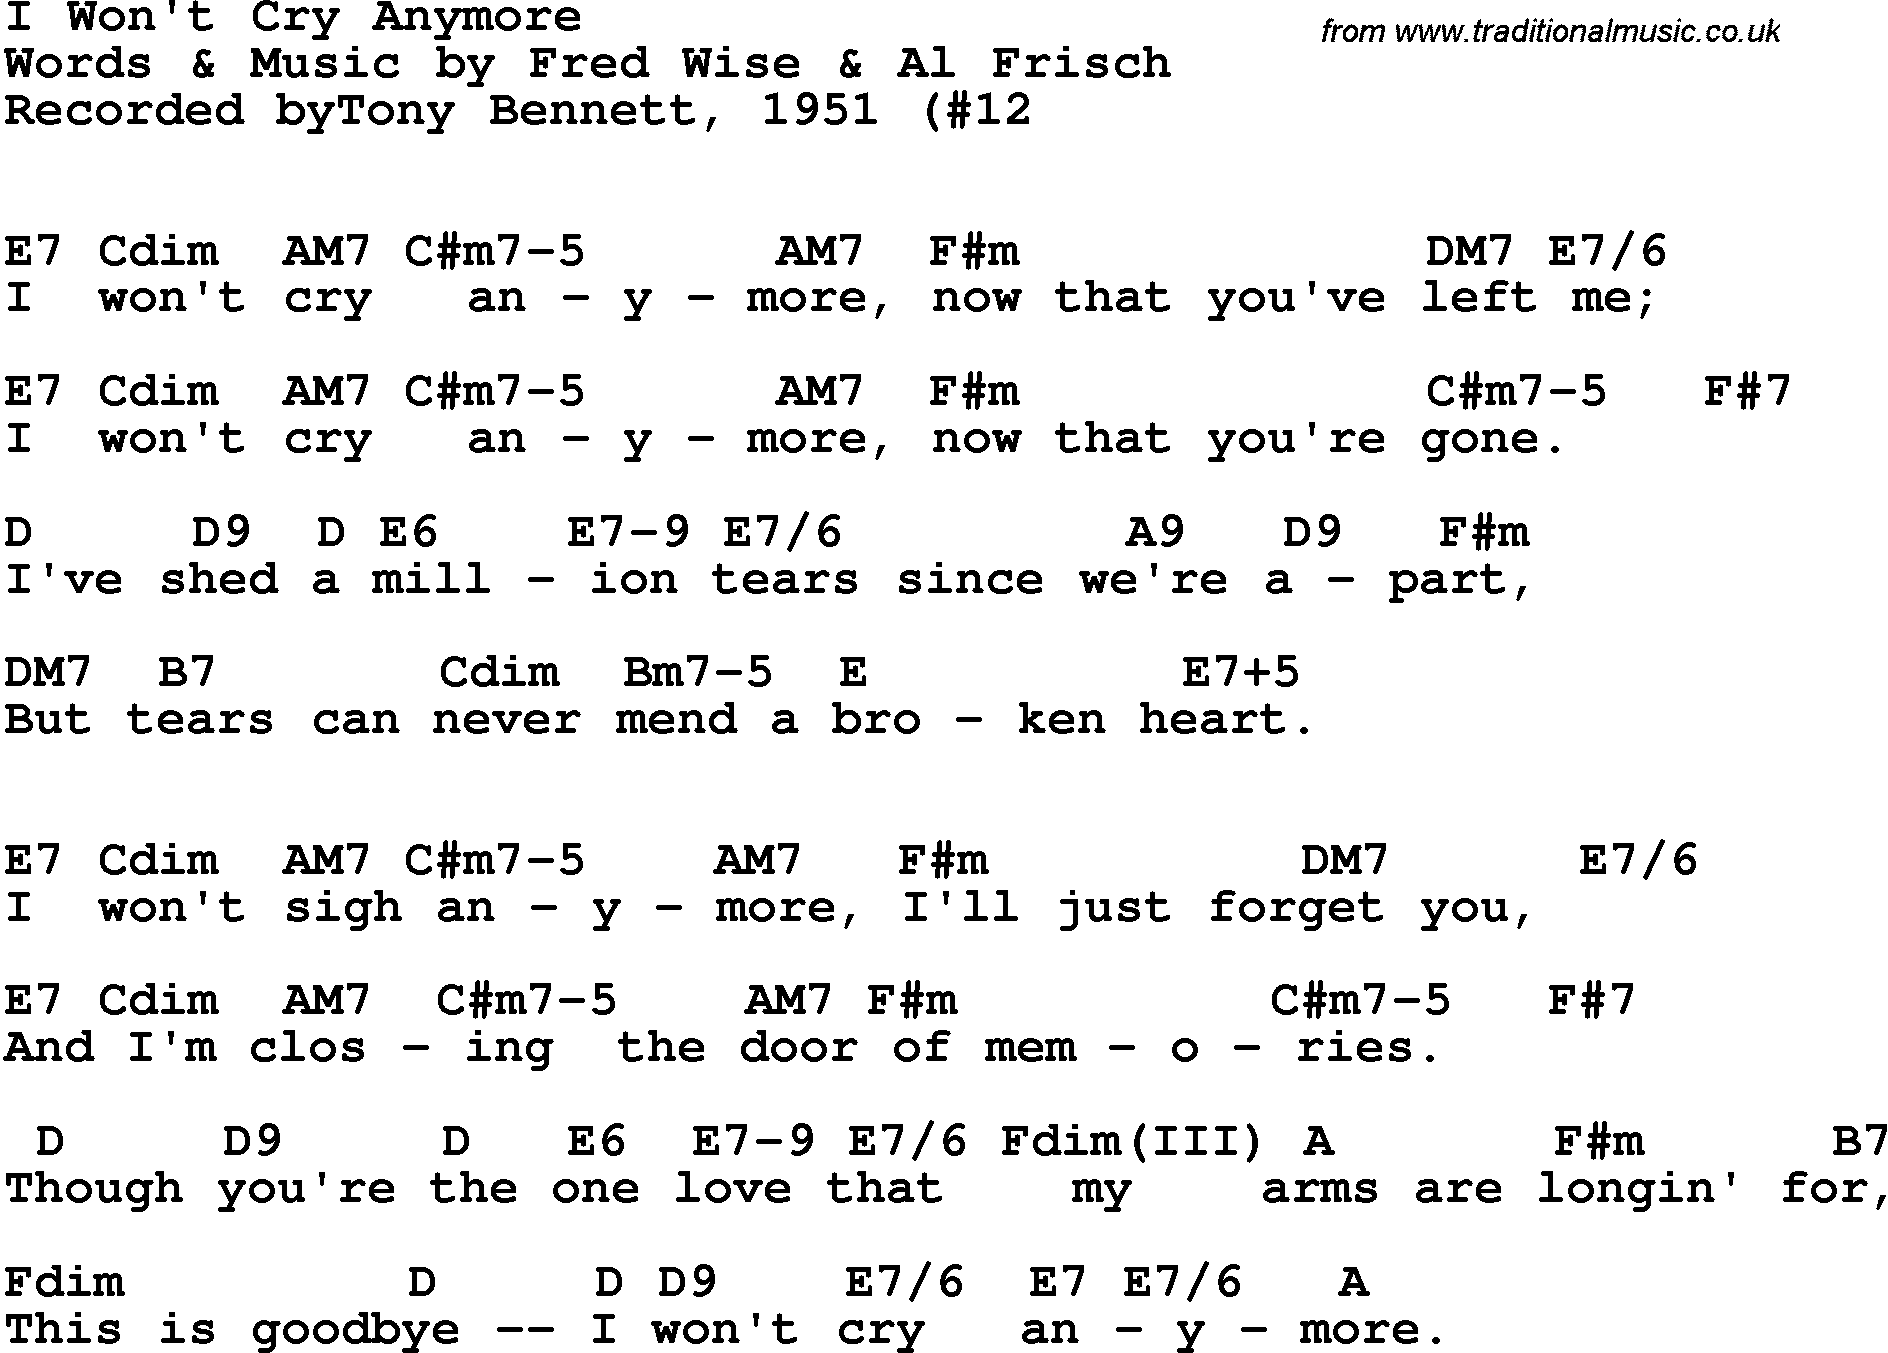 Song Lyrics with guitar chords for I Won't Cry Anymore - Tony Bennett, 1951